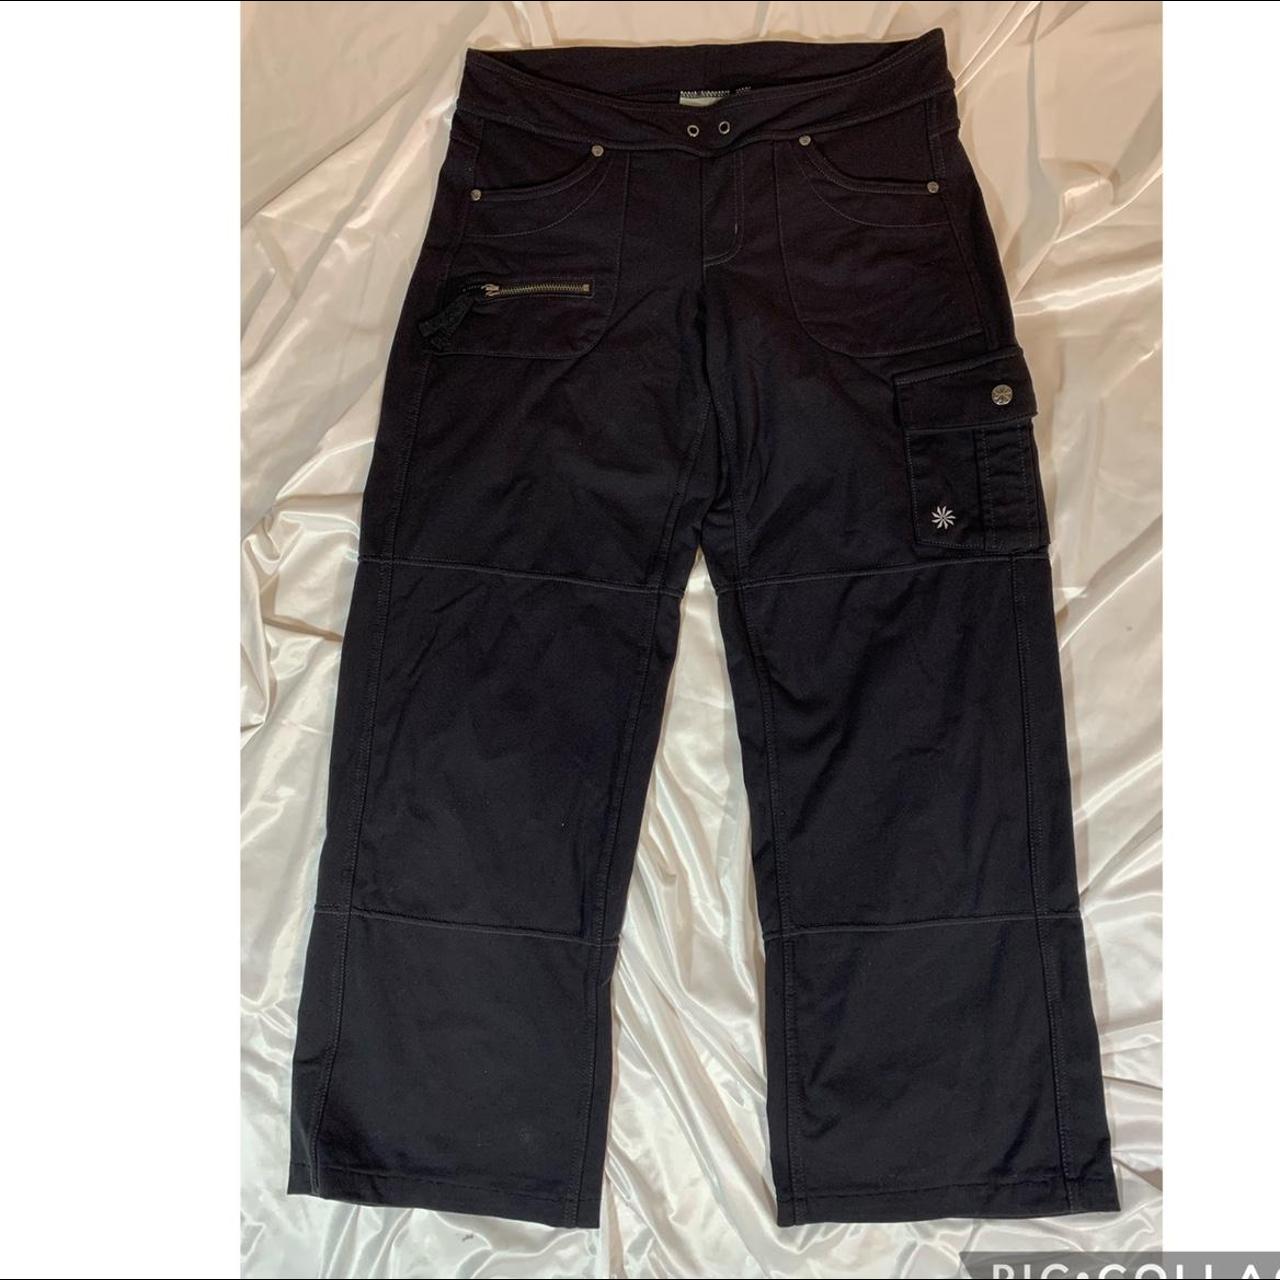 Product Image 3 - Black low rise cargo pants(b1)
Wide